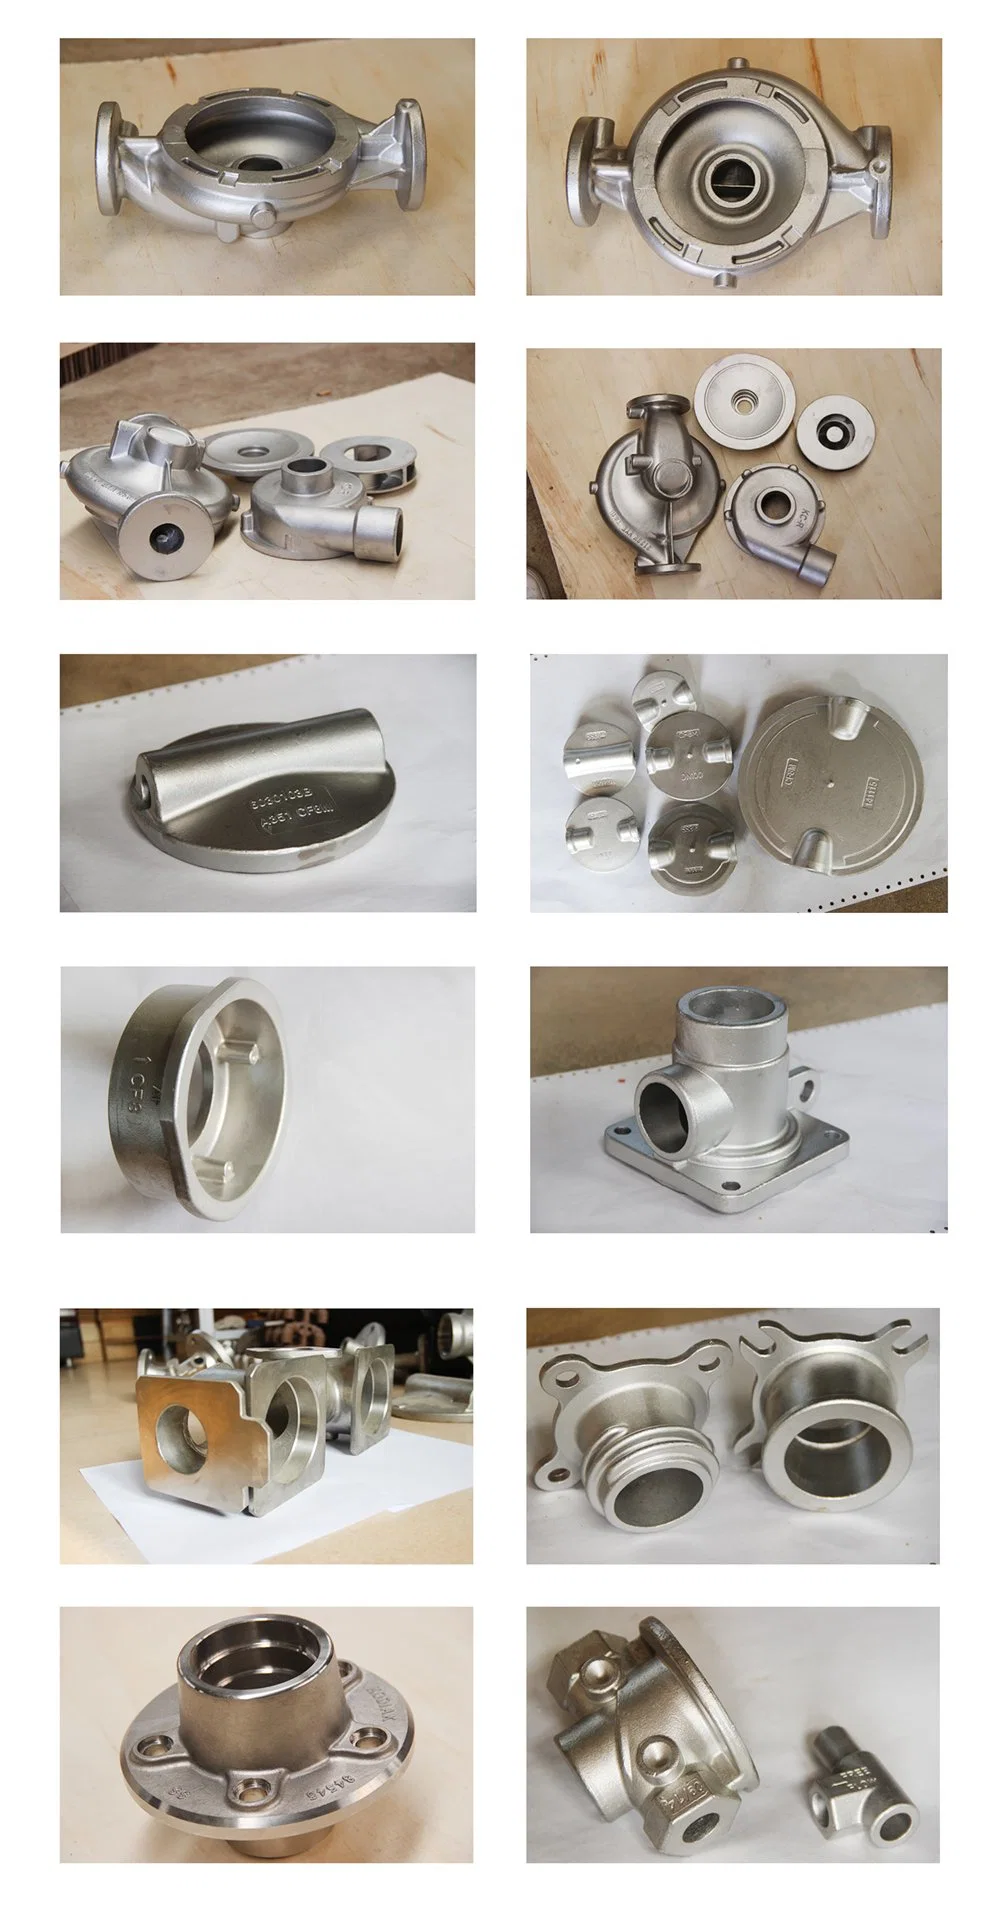 Custom High Precision Casting Stainless Steel Metal Aluminium Lost Wax Investment